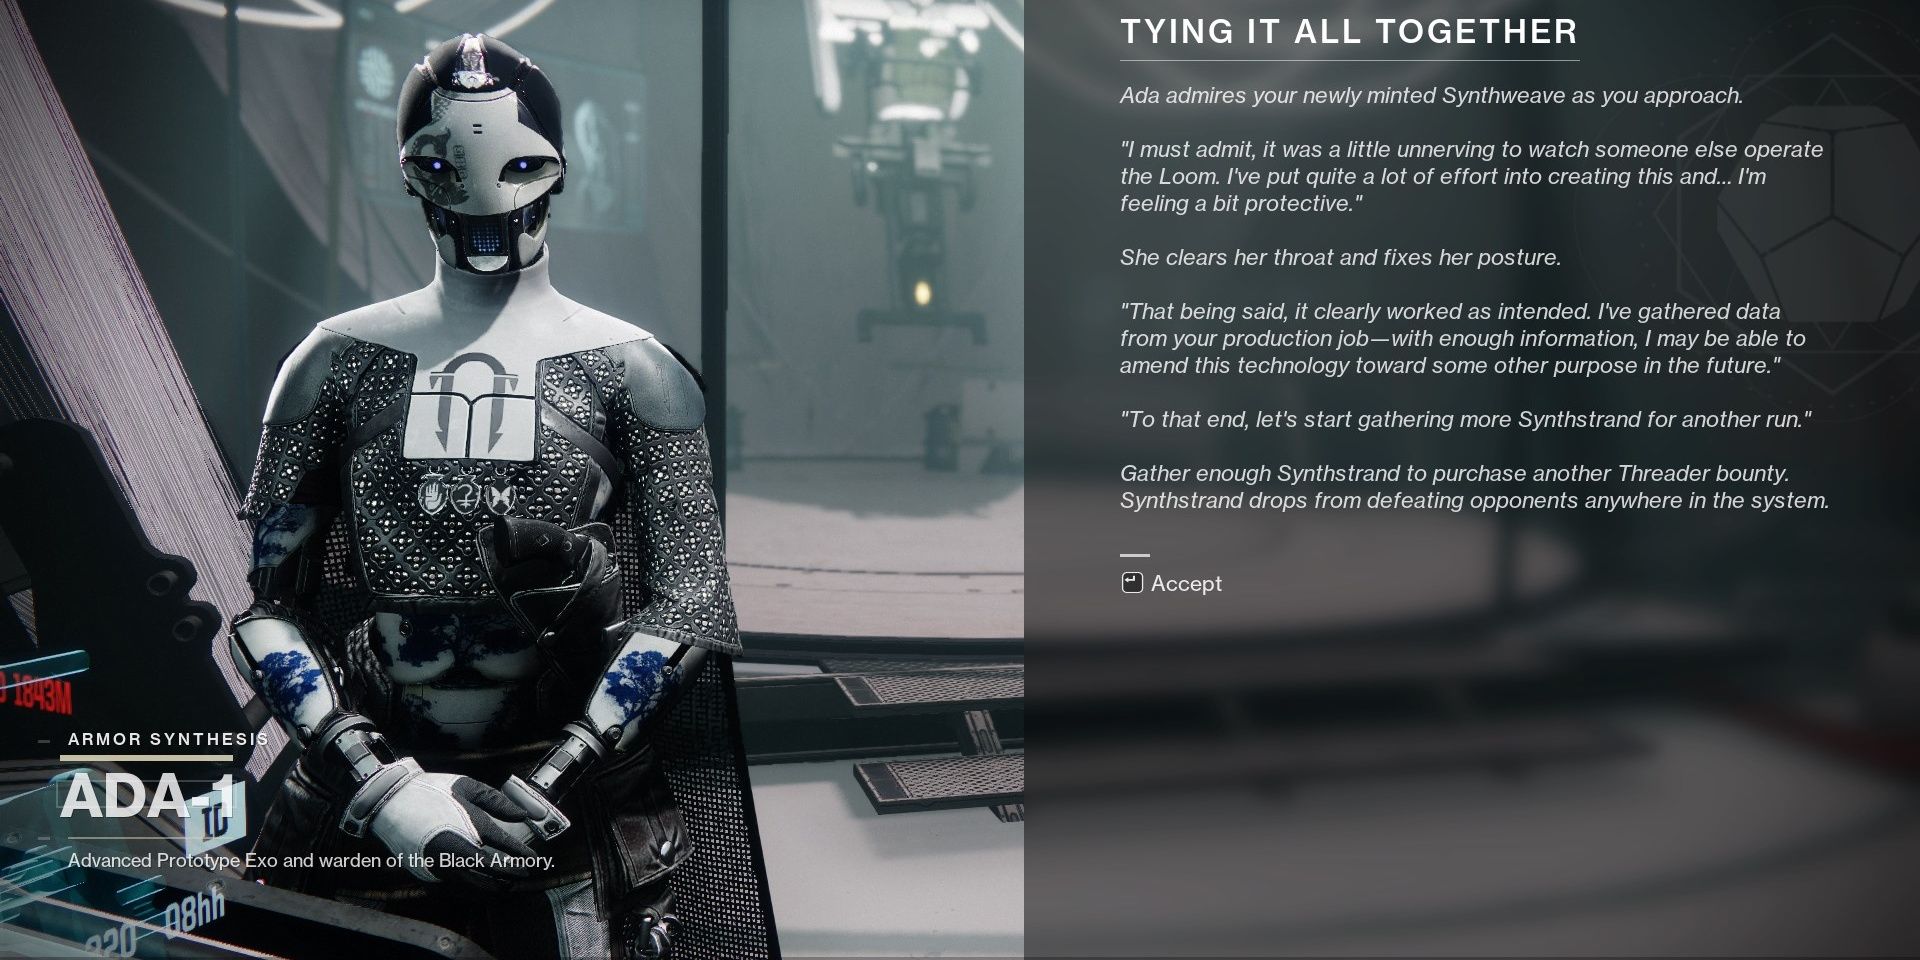 Destiny 2 Tying It All Together Synthstrand Dialogue